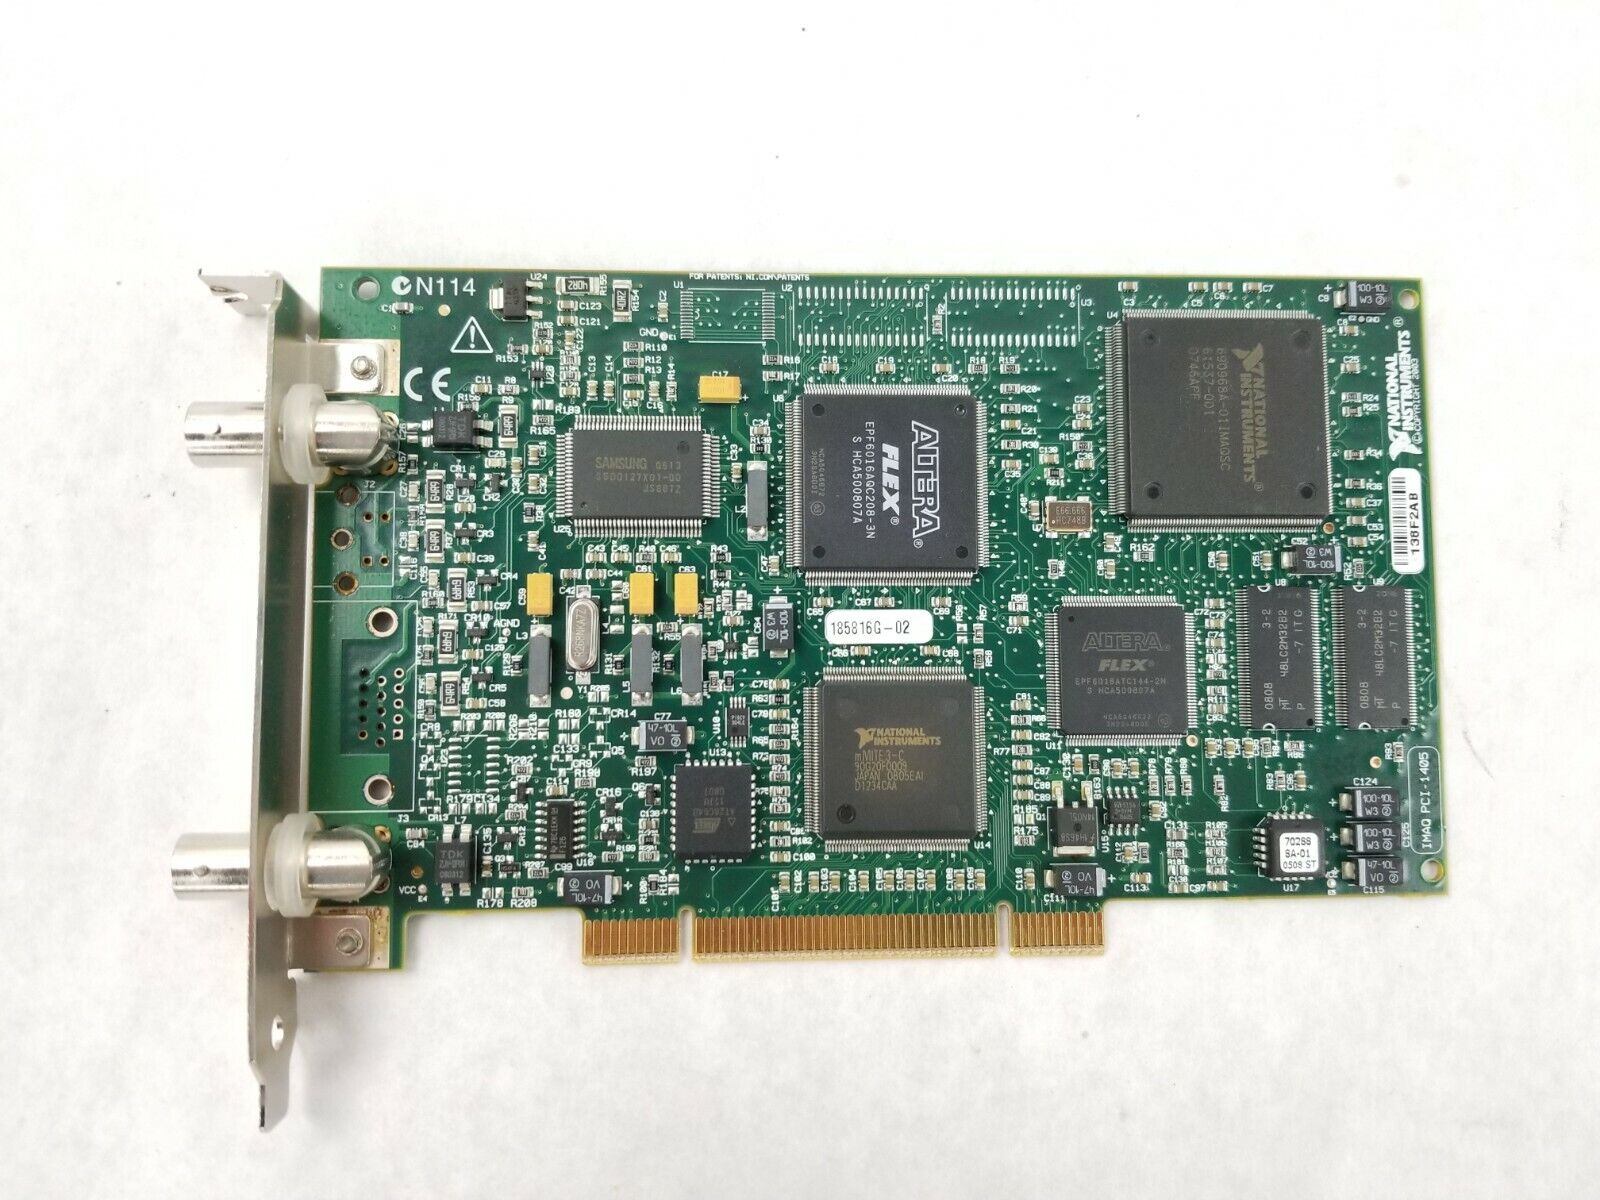 National Instruments IMAQ PCI-1405 185816G-02 Single Channel Acquistion Module